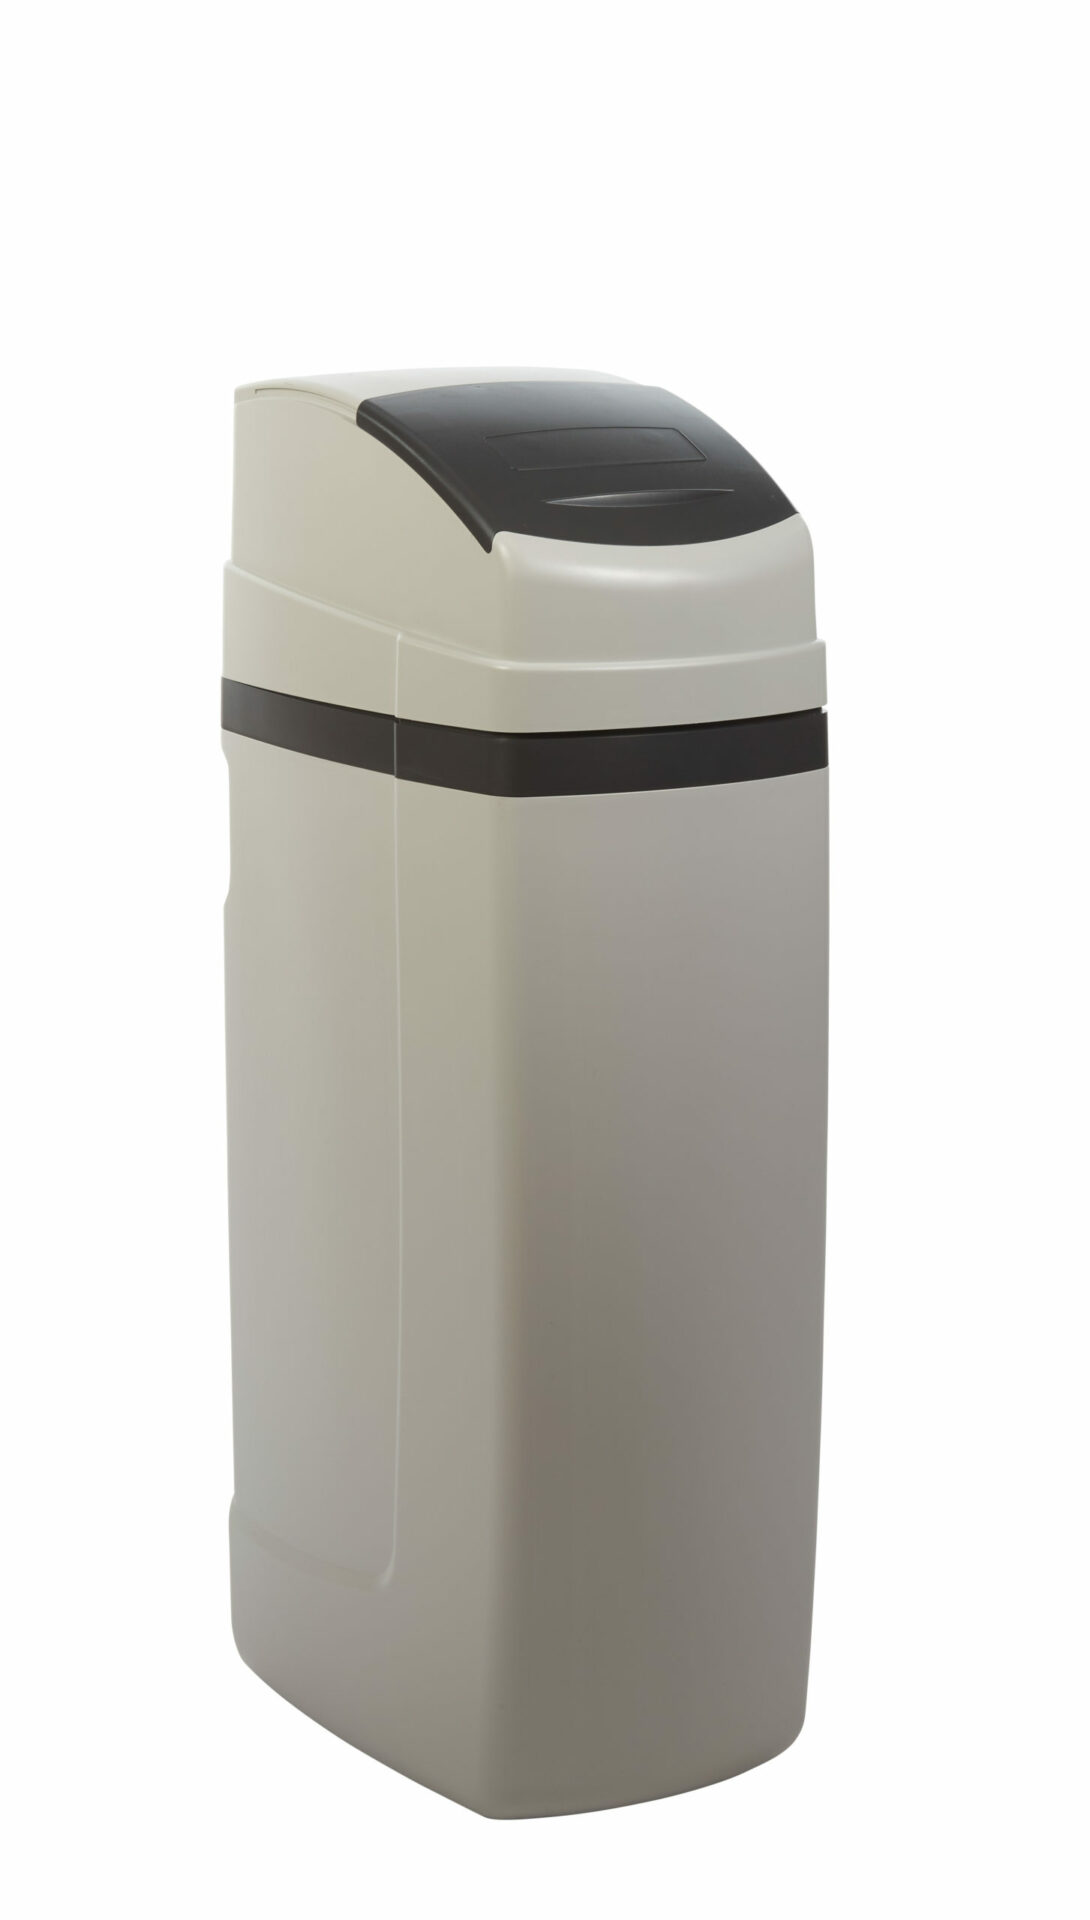 Wood Bros. Commercial Water Softener – All-in-one